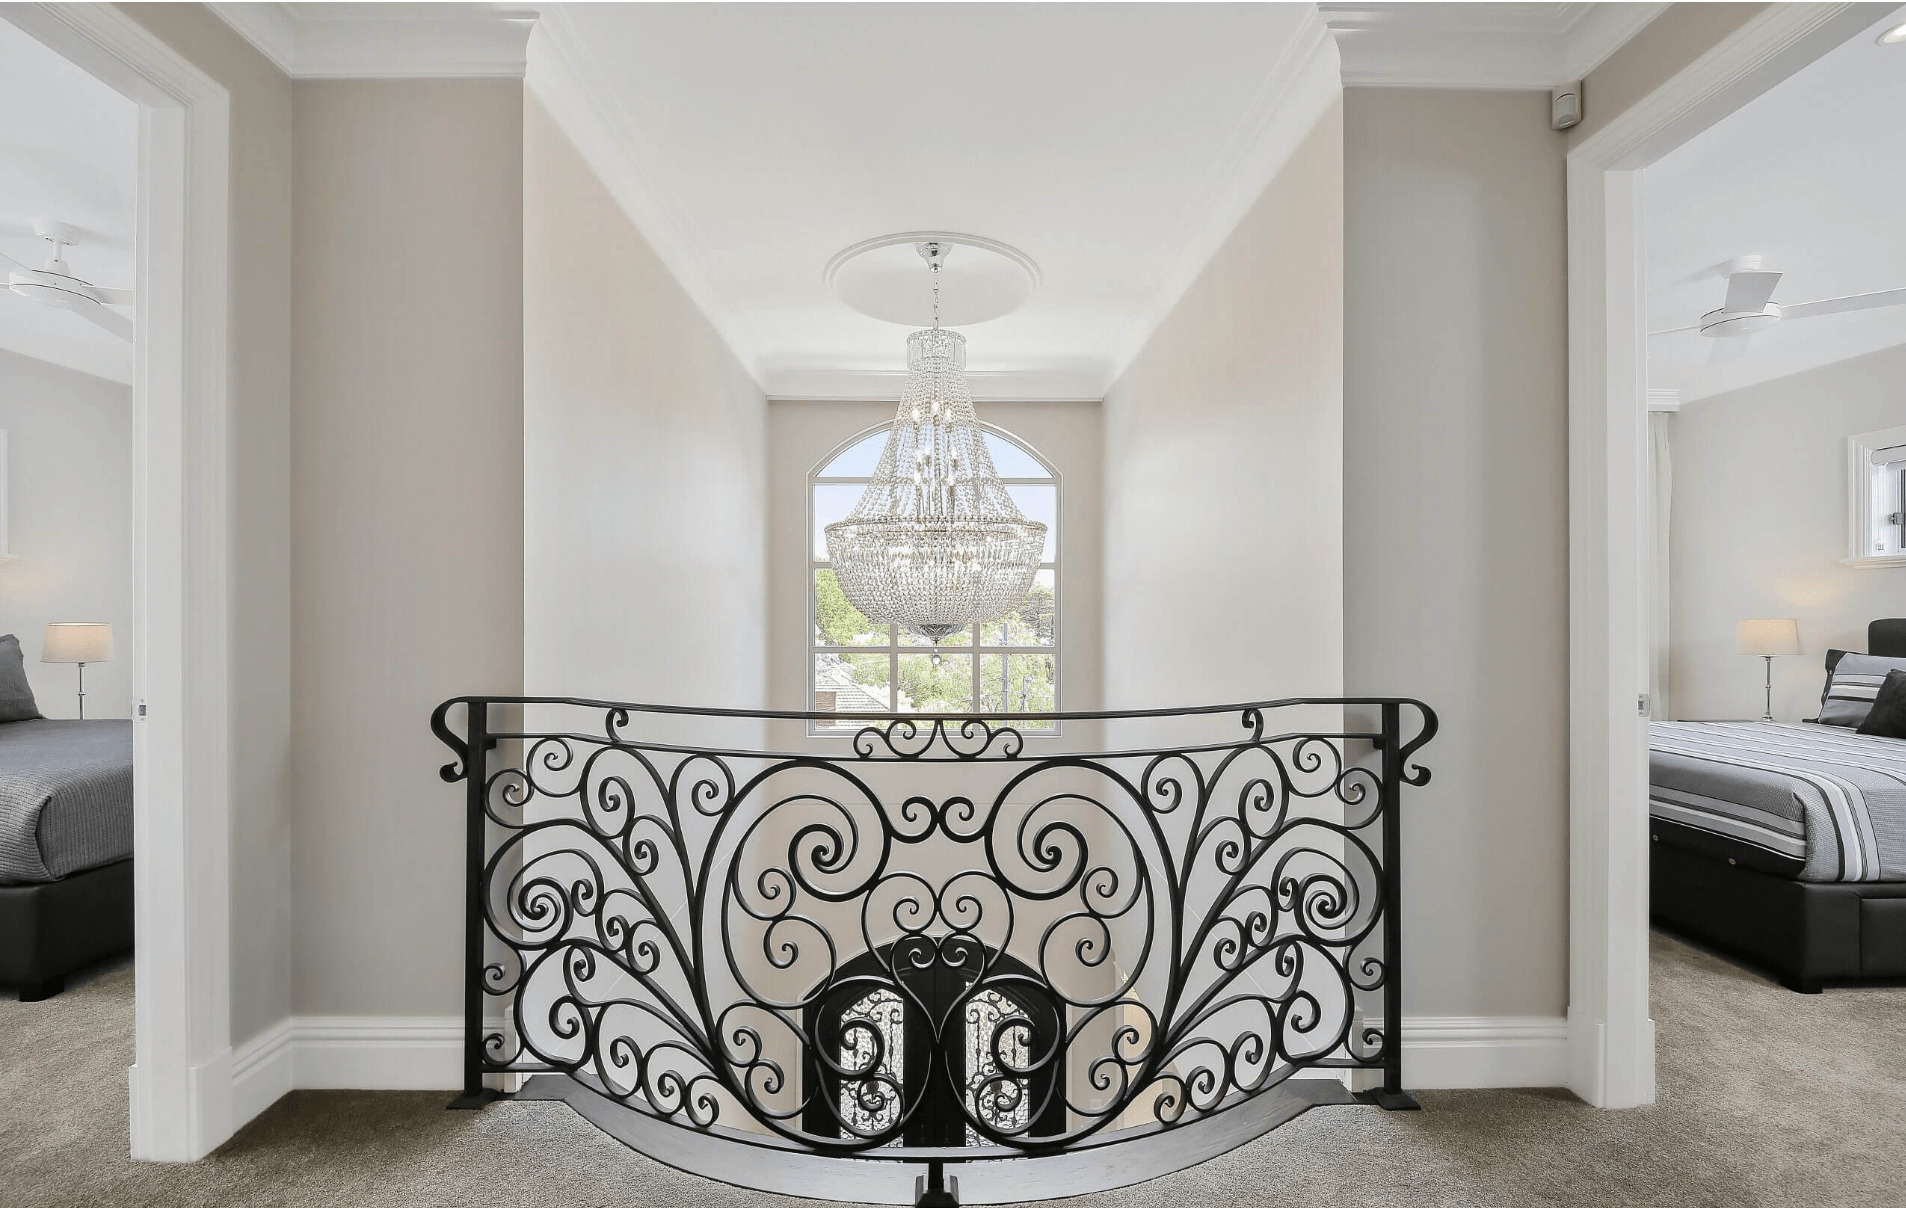 Wrought iron details in a modern home